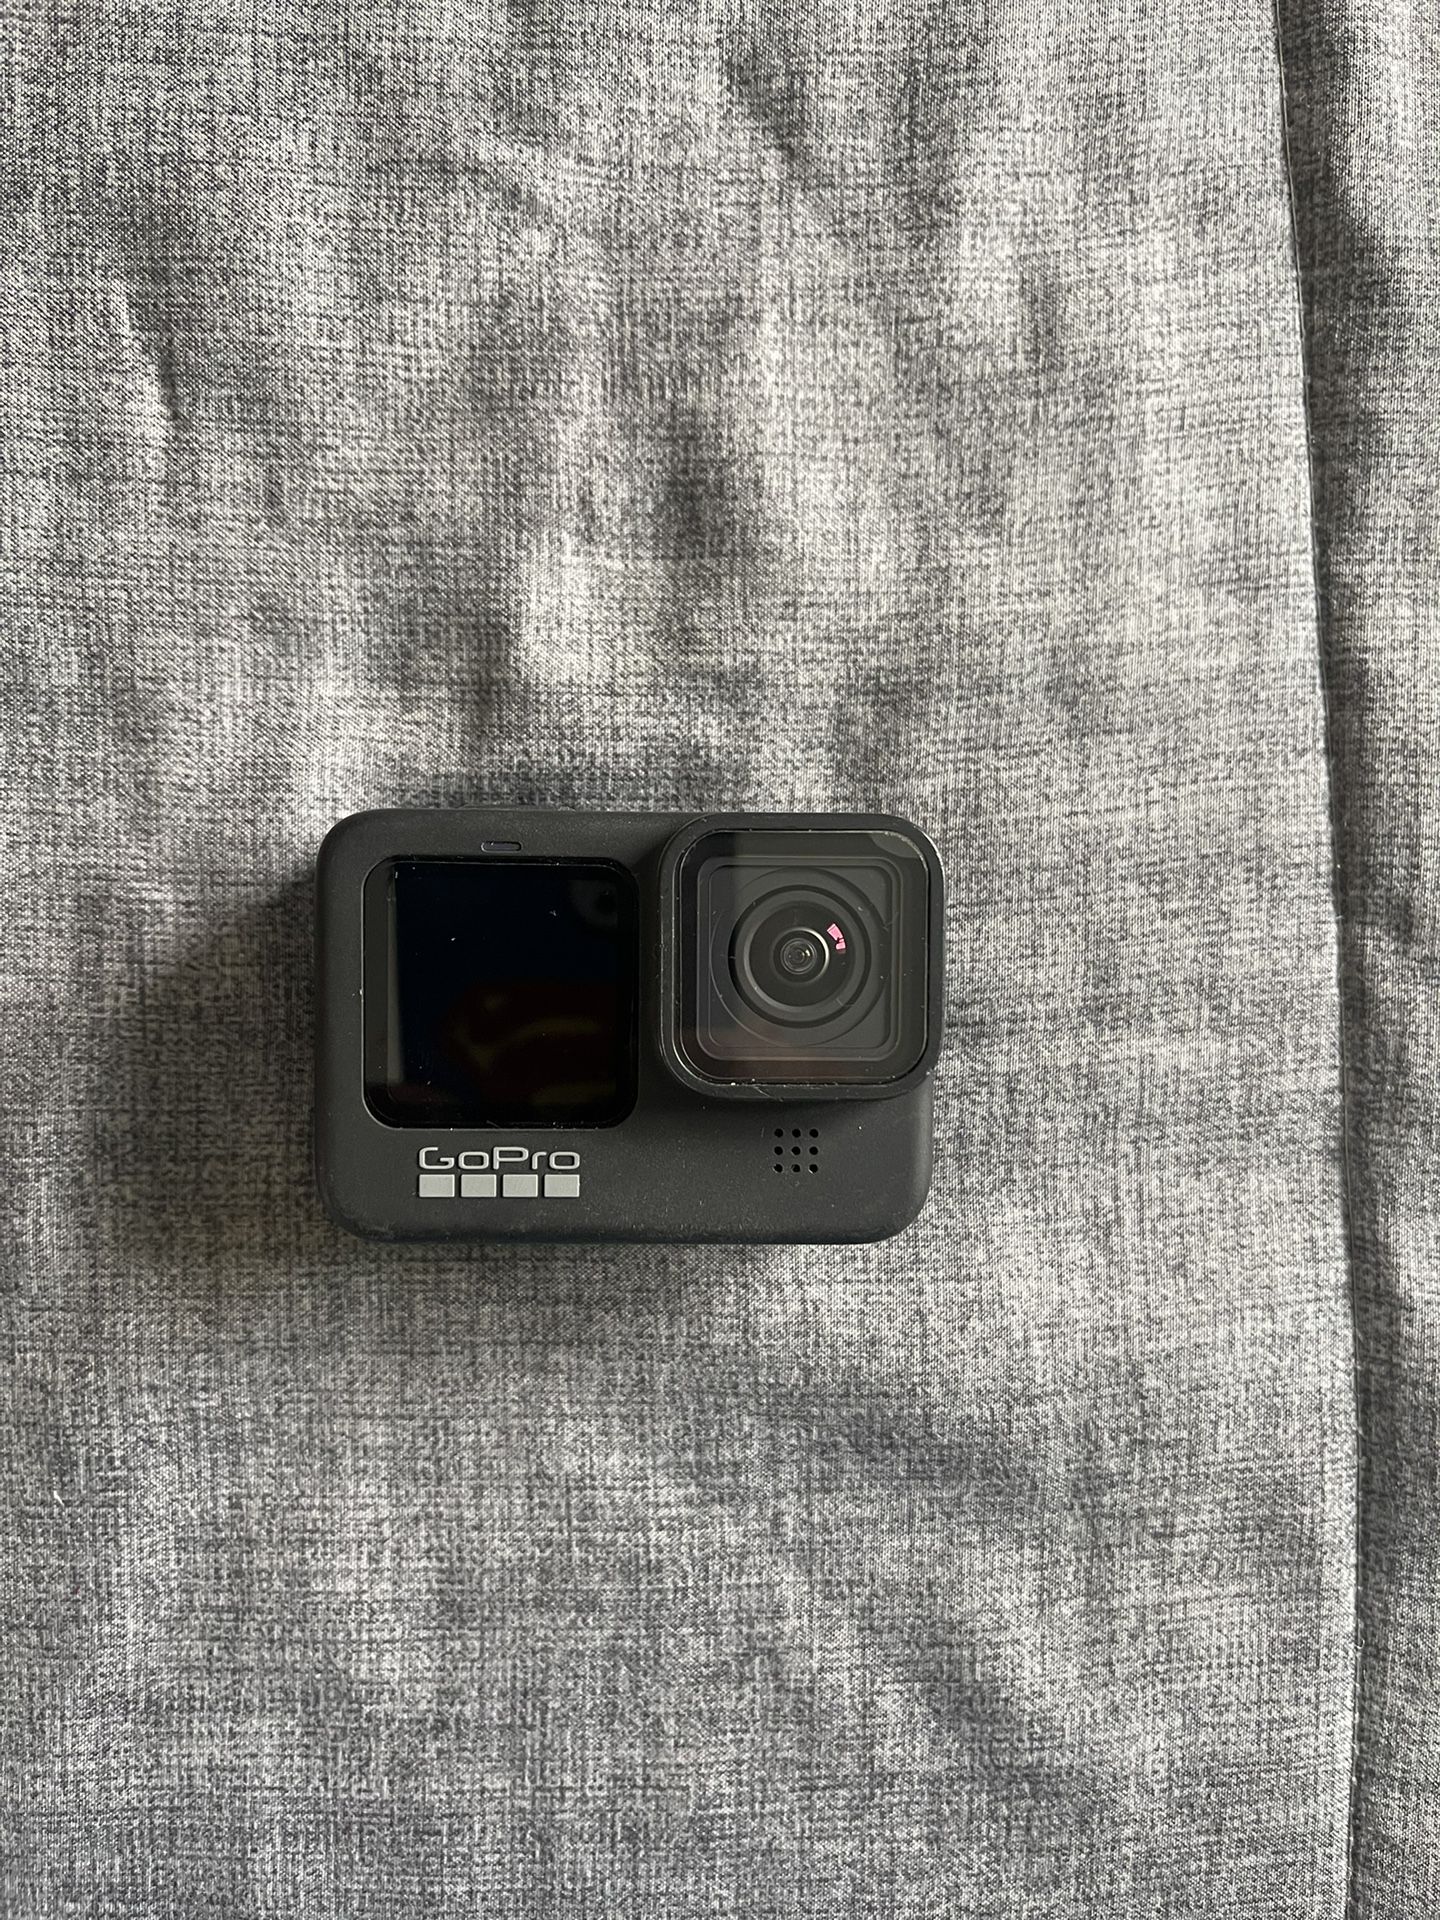 Go Pro Camera For Travel Or Sporting